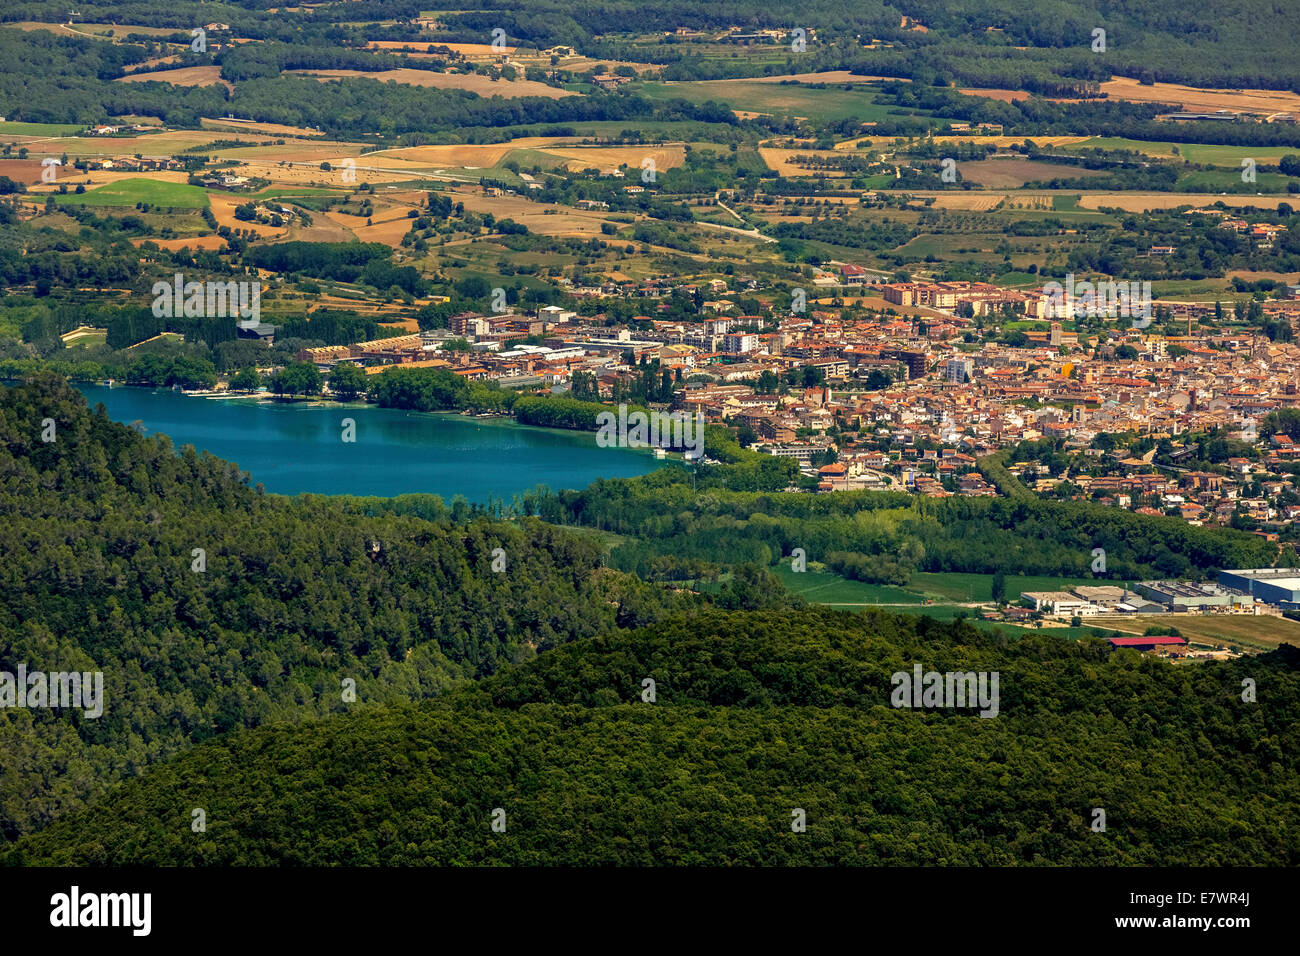 Aerial view, townscape, Banyoles, Catalonia, Spain Stock Photo